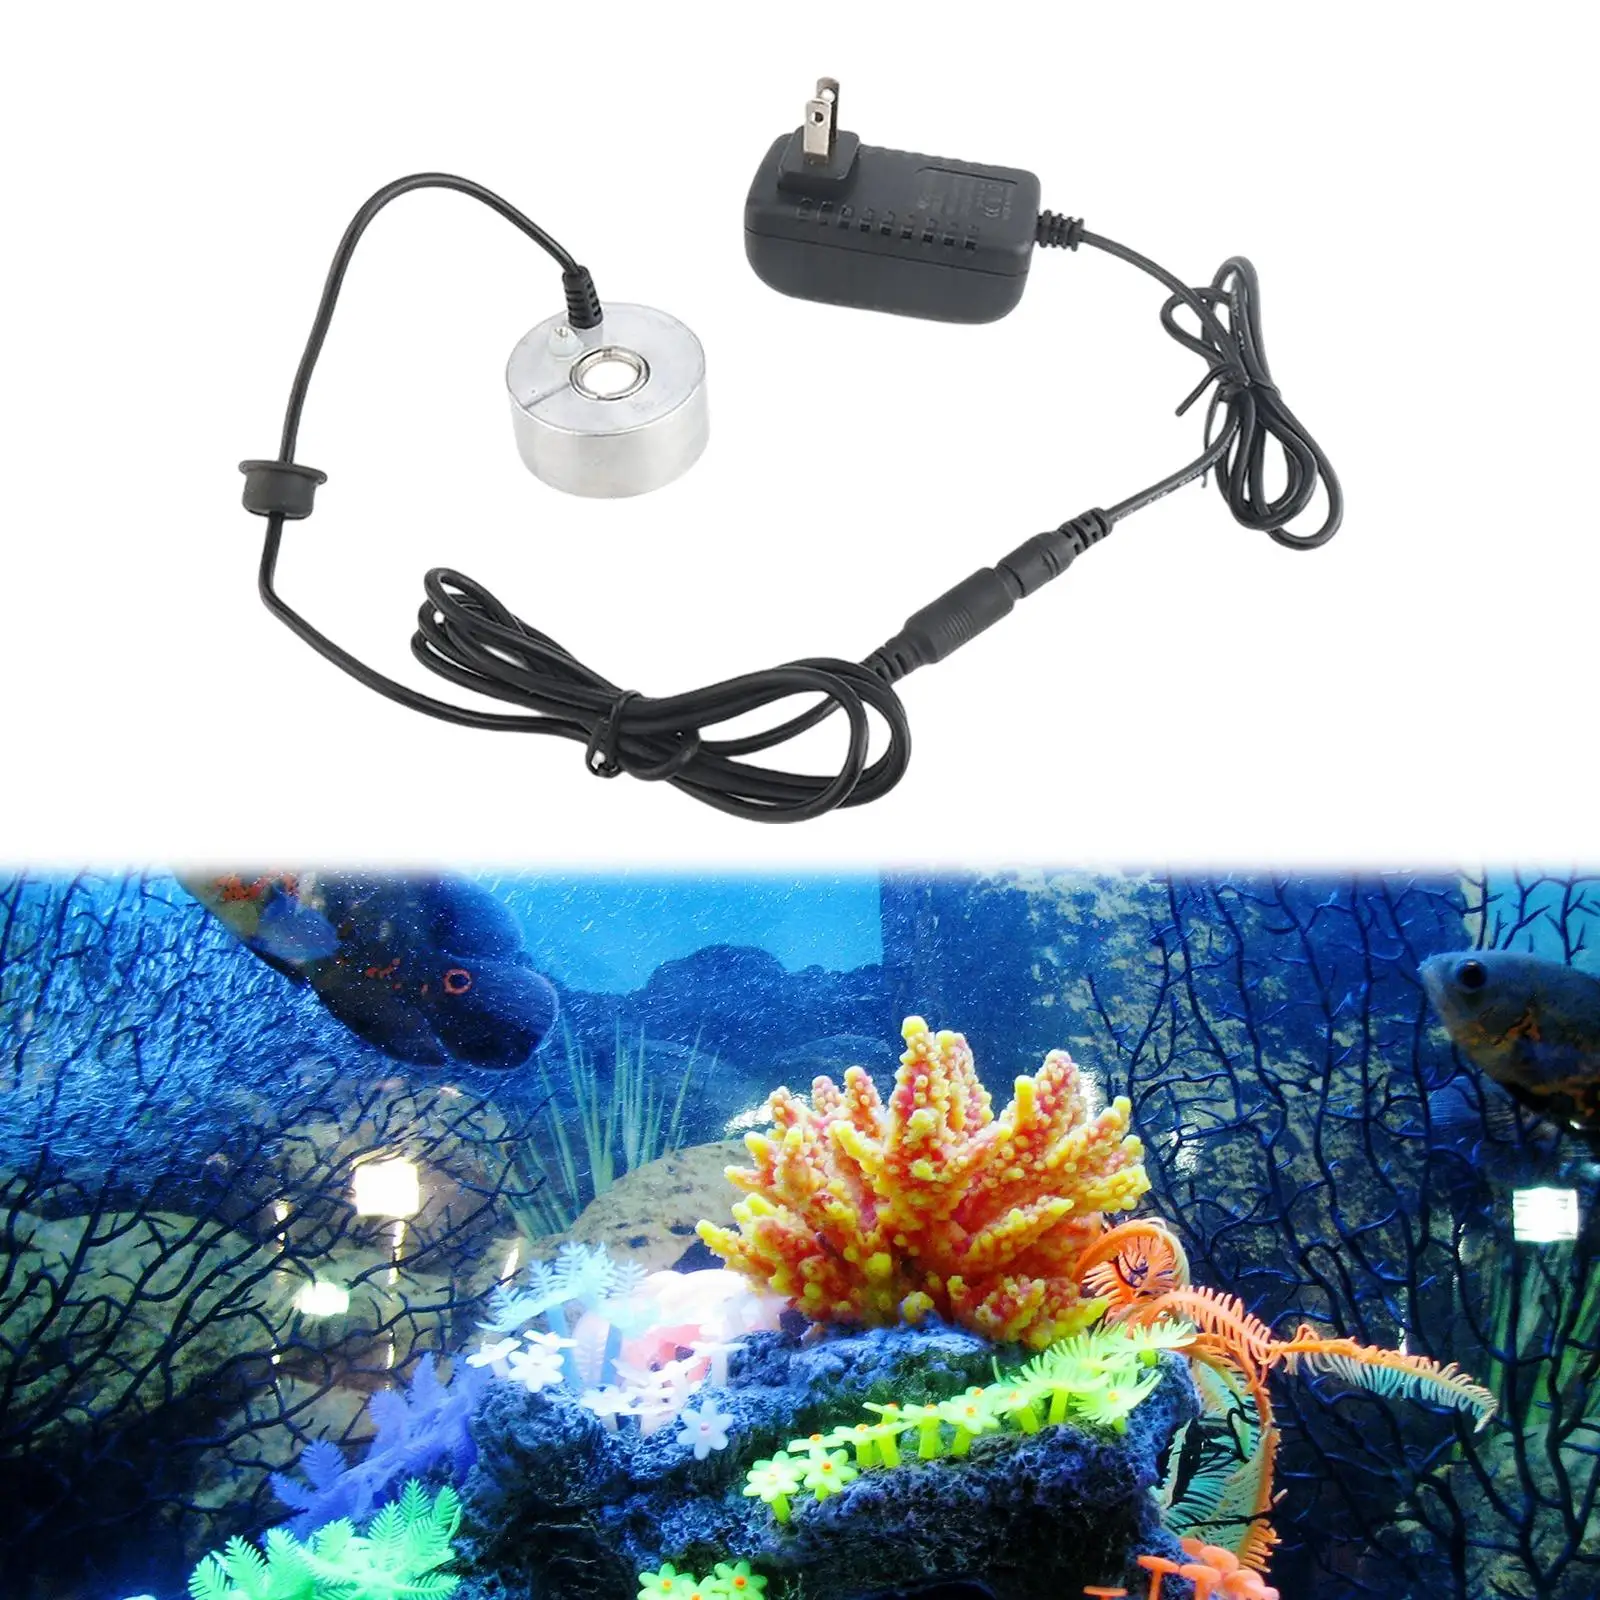 24V Ultrasonic Mist Maker Water Fountain Atomizer Air Humidifier Fogger for Decoration Indoor Rockery Garden Pond